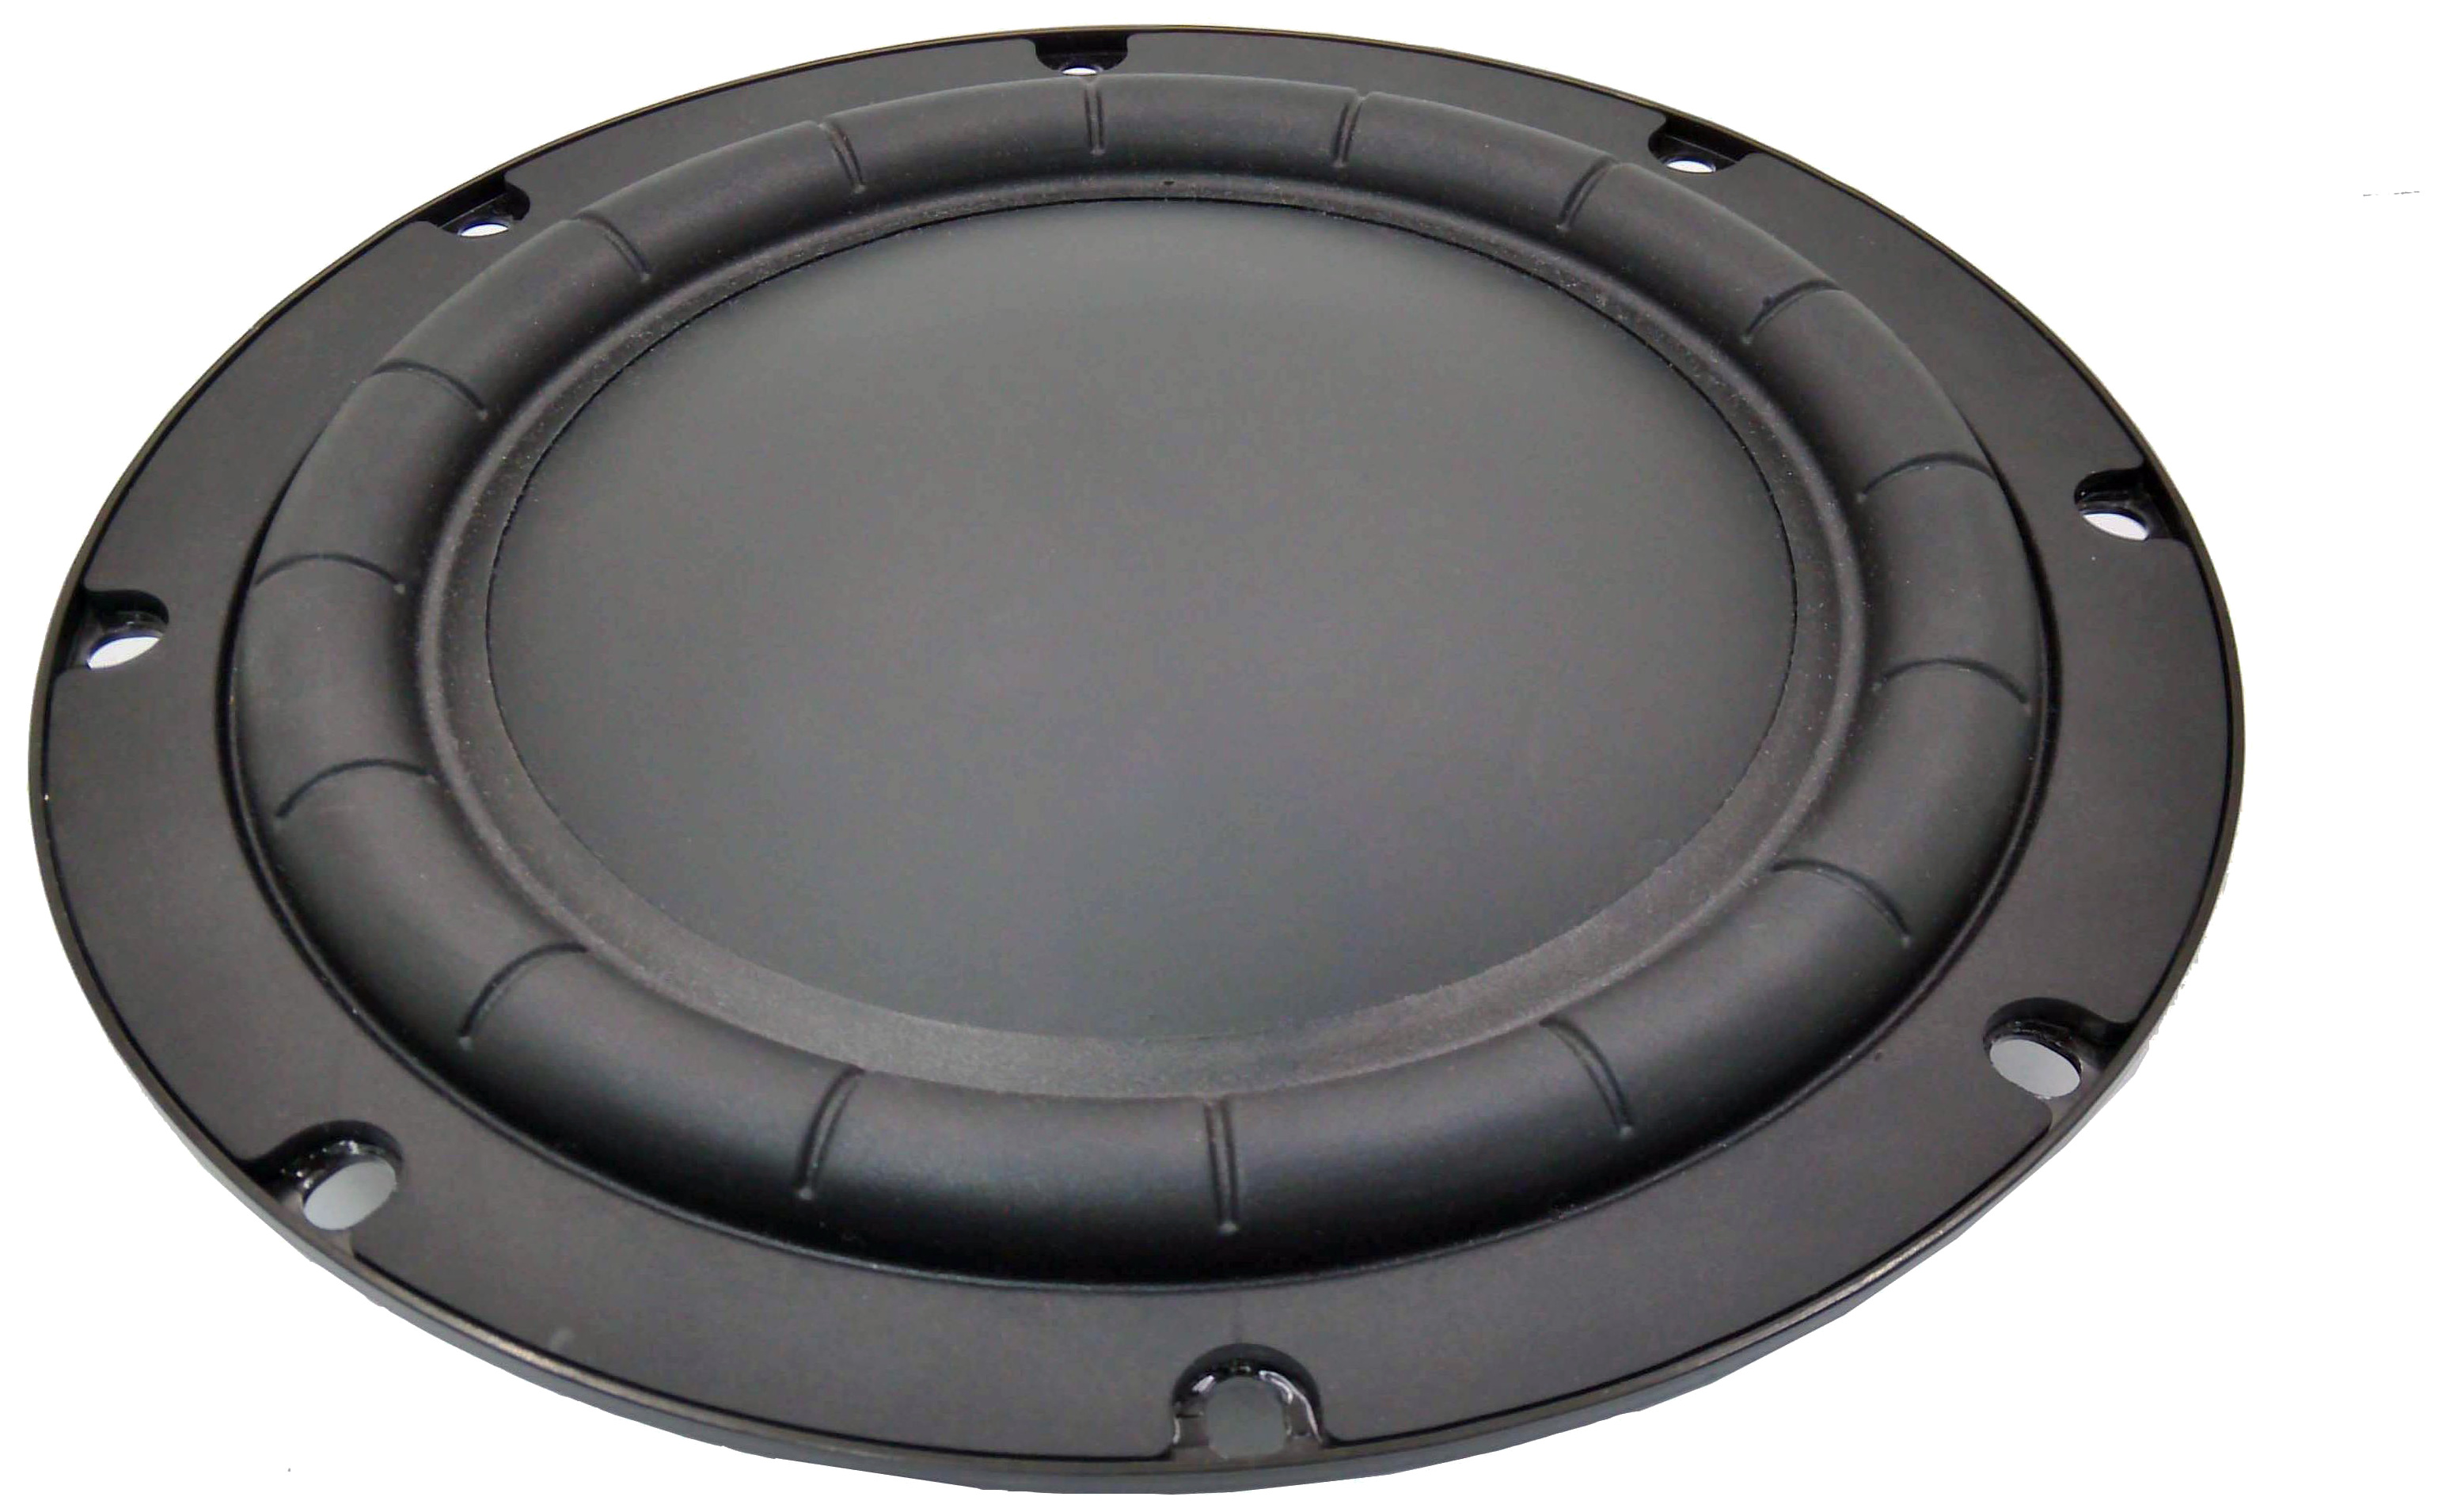 Peerless GBS-200F35CP02-04 Shallow Subwoofer